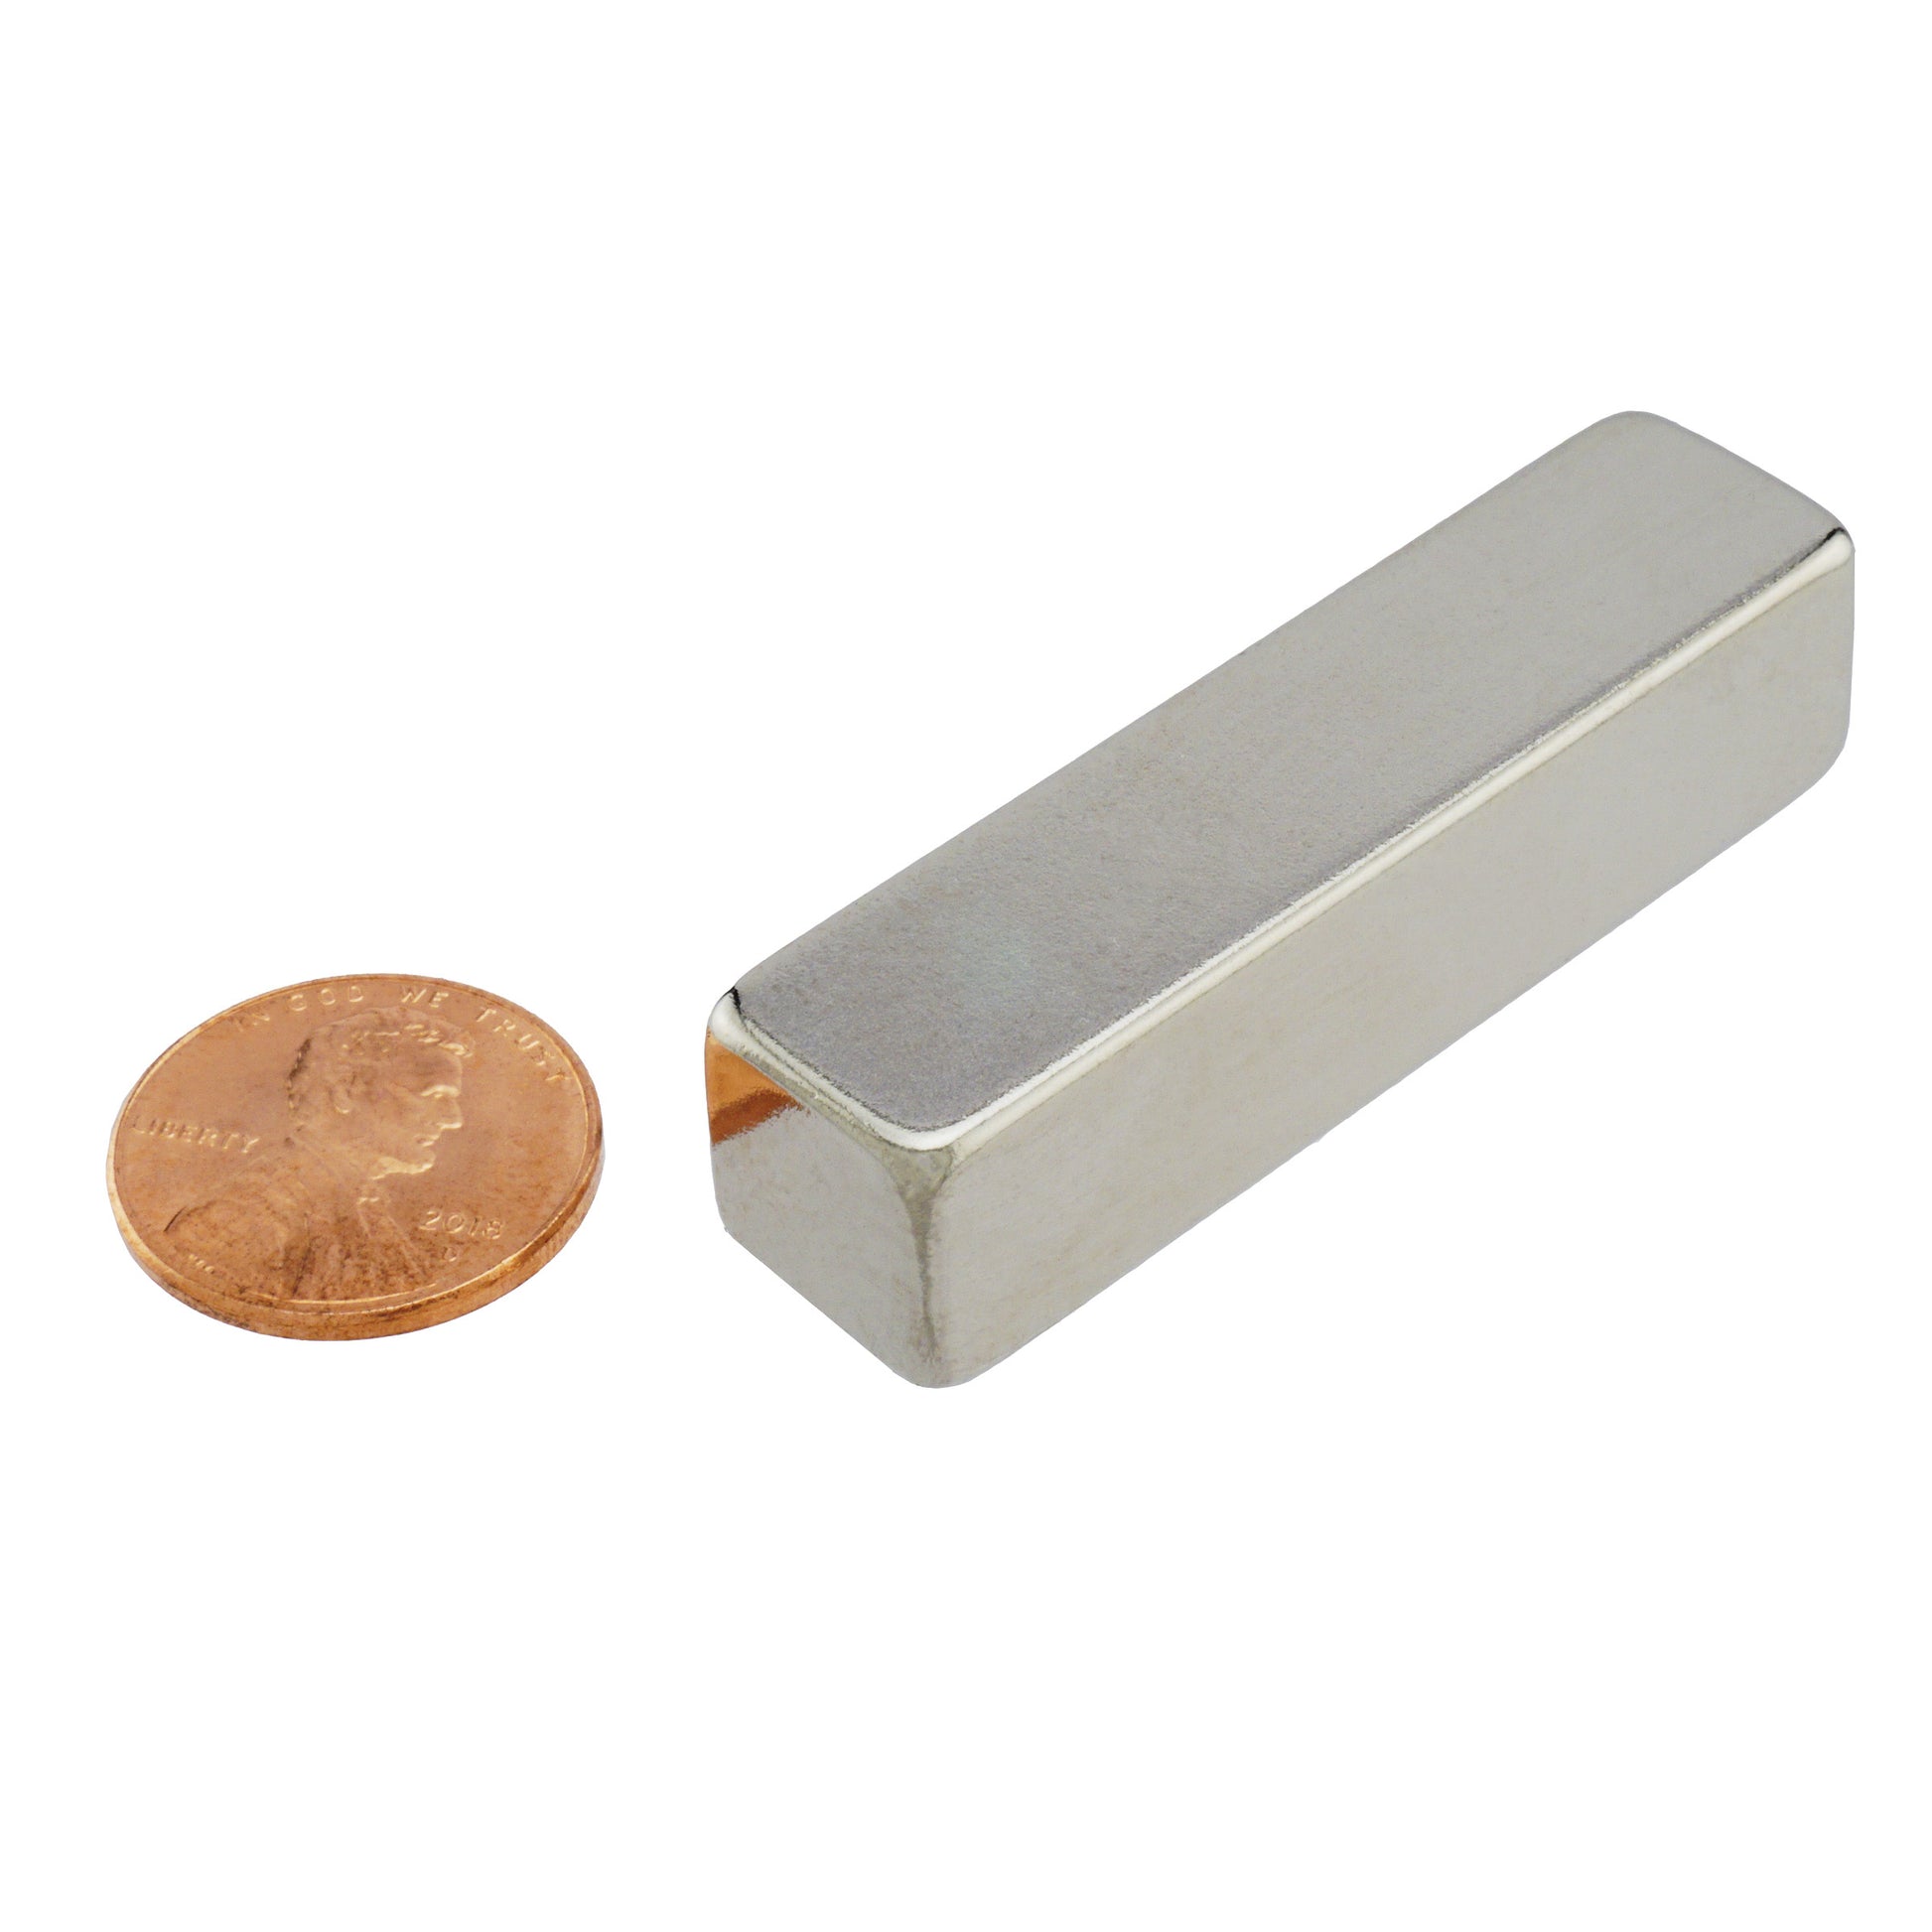 Load image into Gallery viewer, NB50502N-35 Neodymium Block Magnet - Compared to Penny for Size Reference